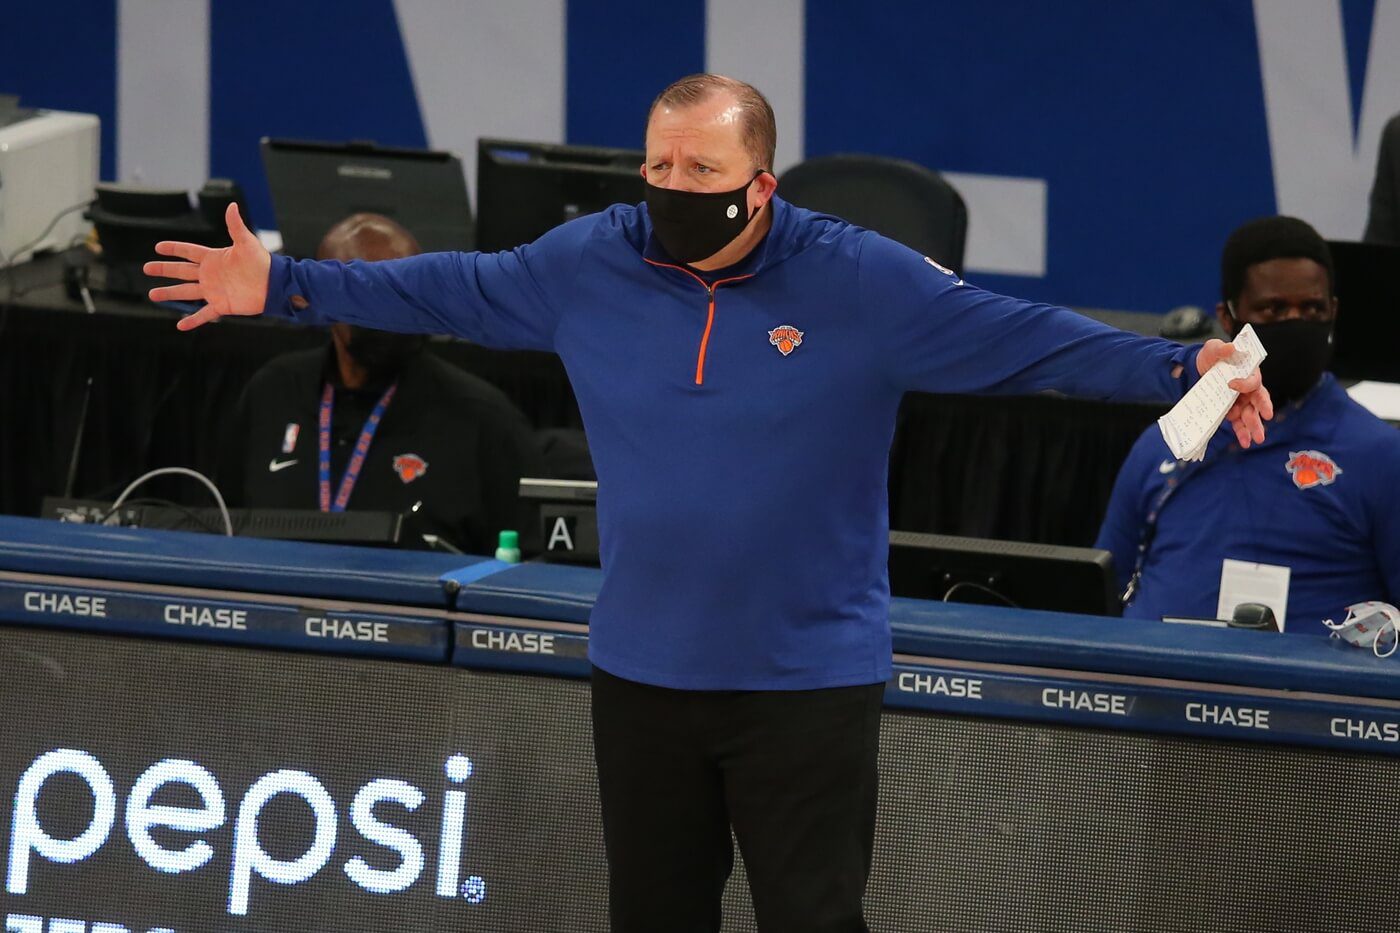 Jan 31, 2021; New York, New York, USA; New York Knicks head coach Tom Thibodeau reacts as he coaches against the LA Clippers during the second quarter at Madison Square Garden. Mandatory Credit: Brad Penner-USA TODAY Sports